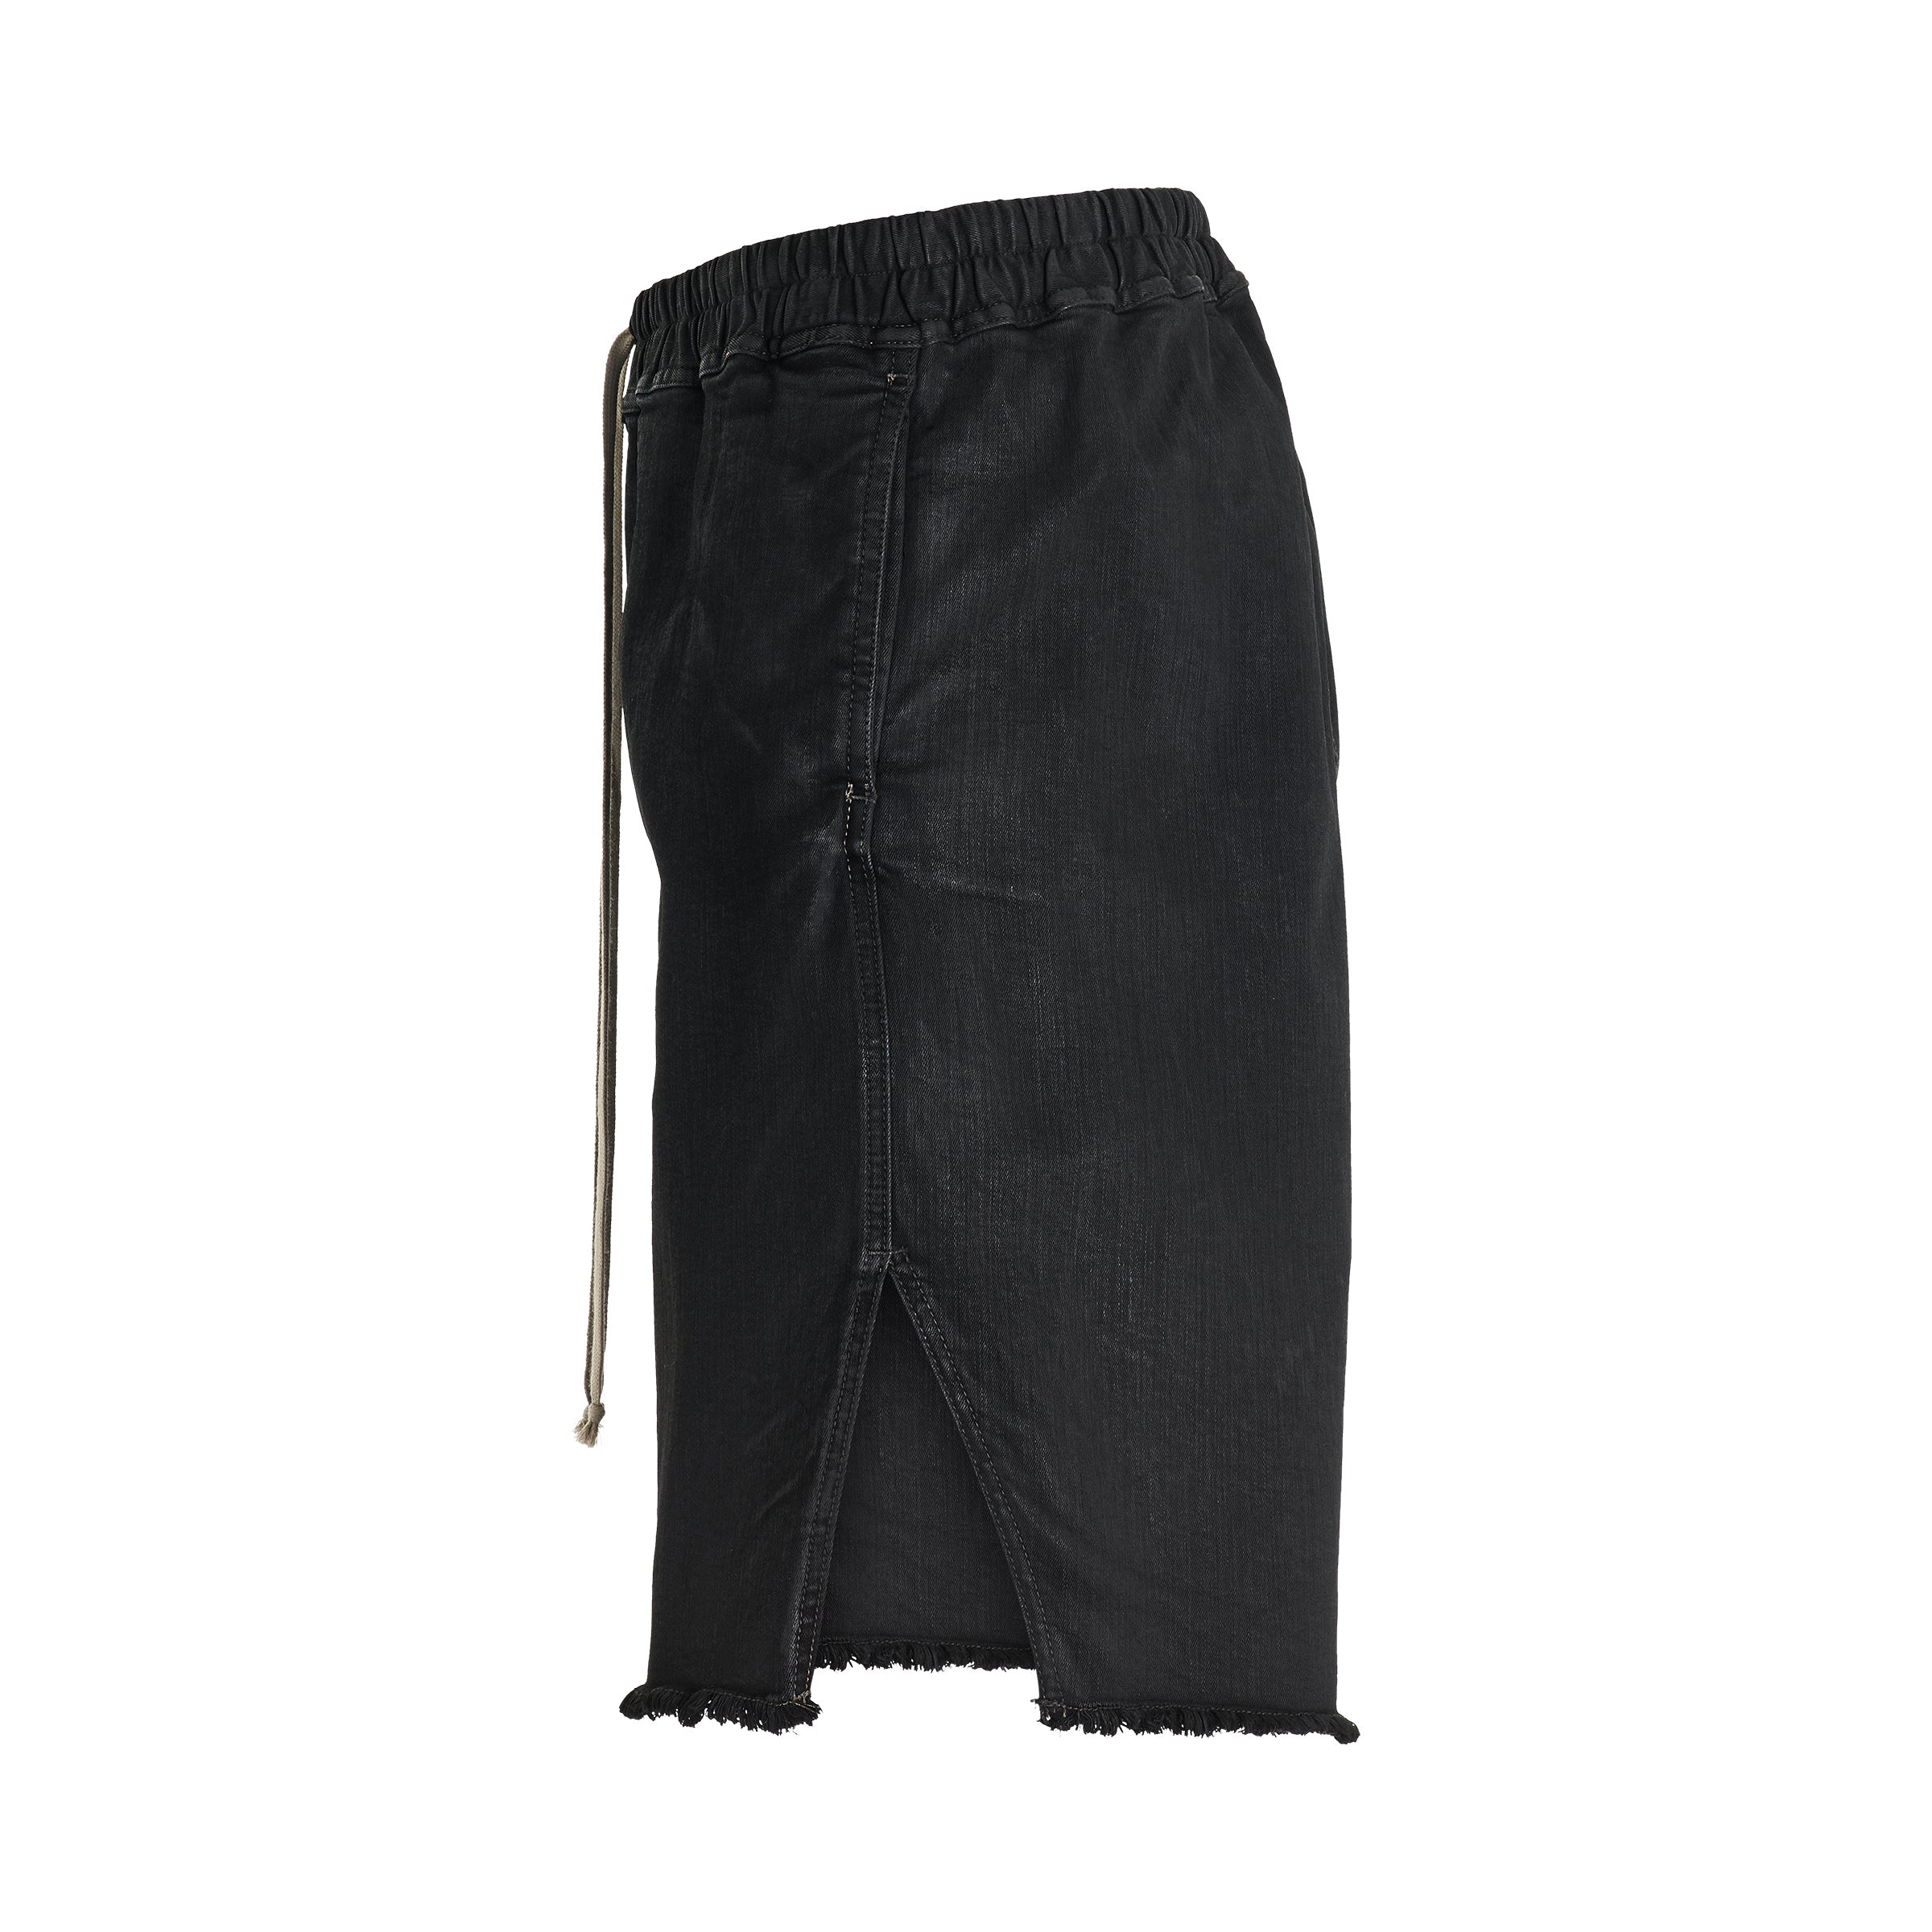 Long Boxers Shorts in Black Wax - 3